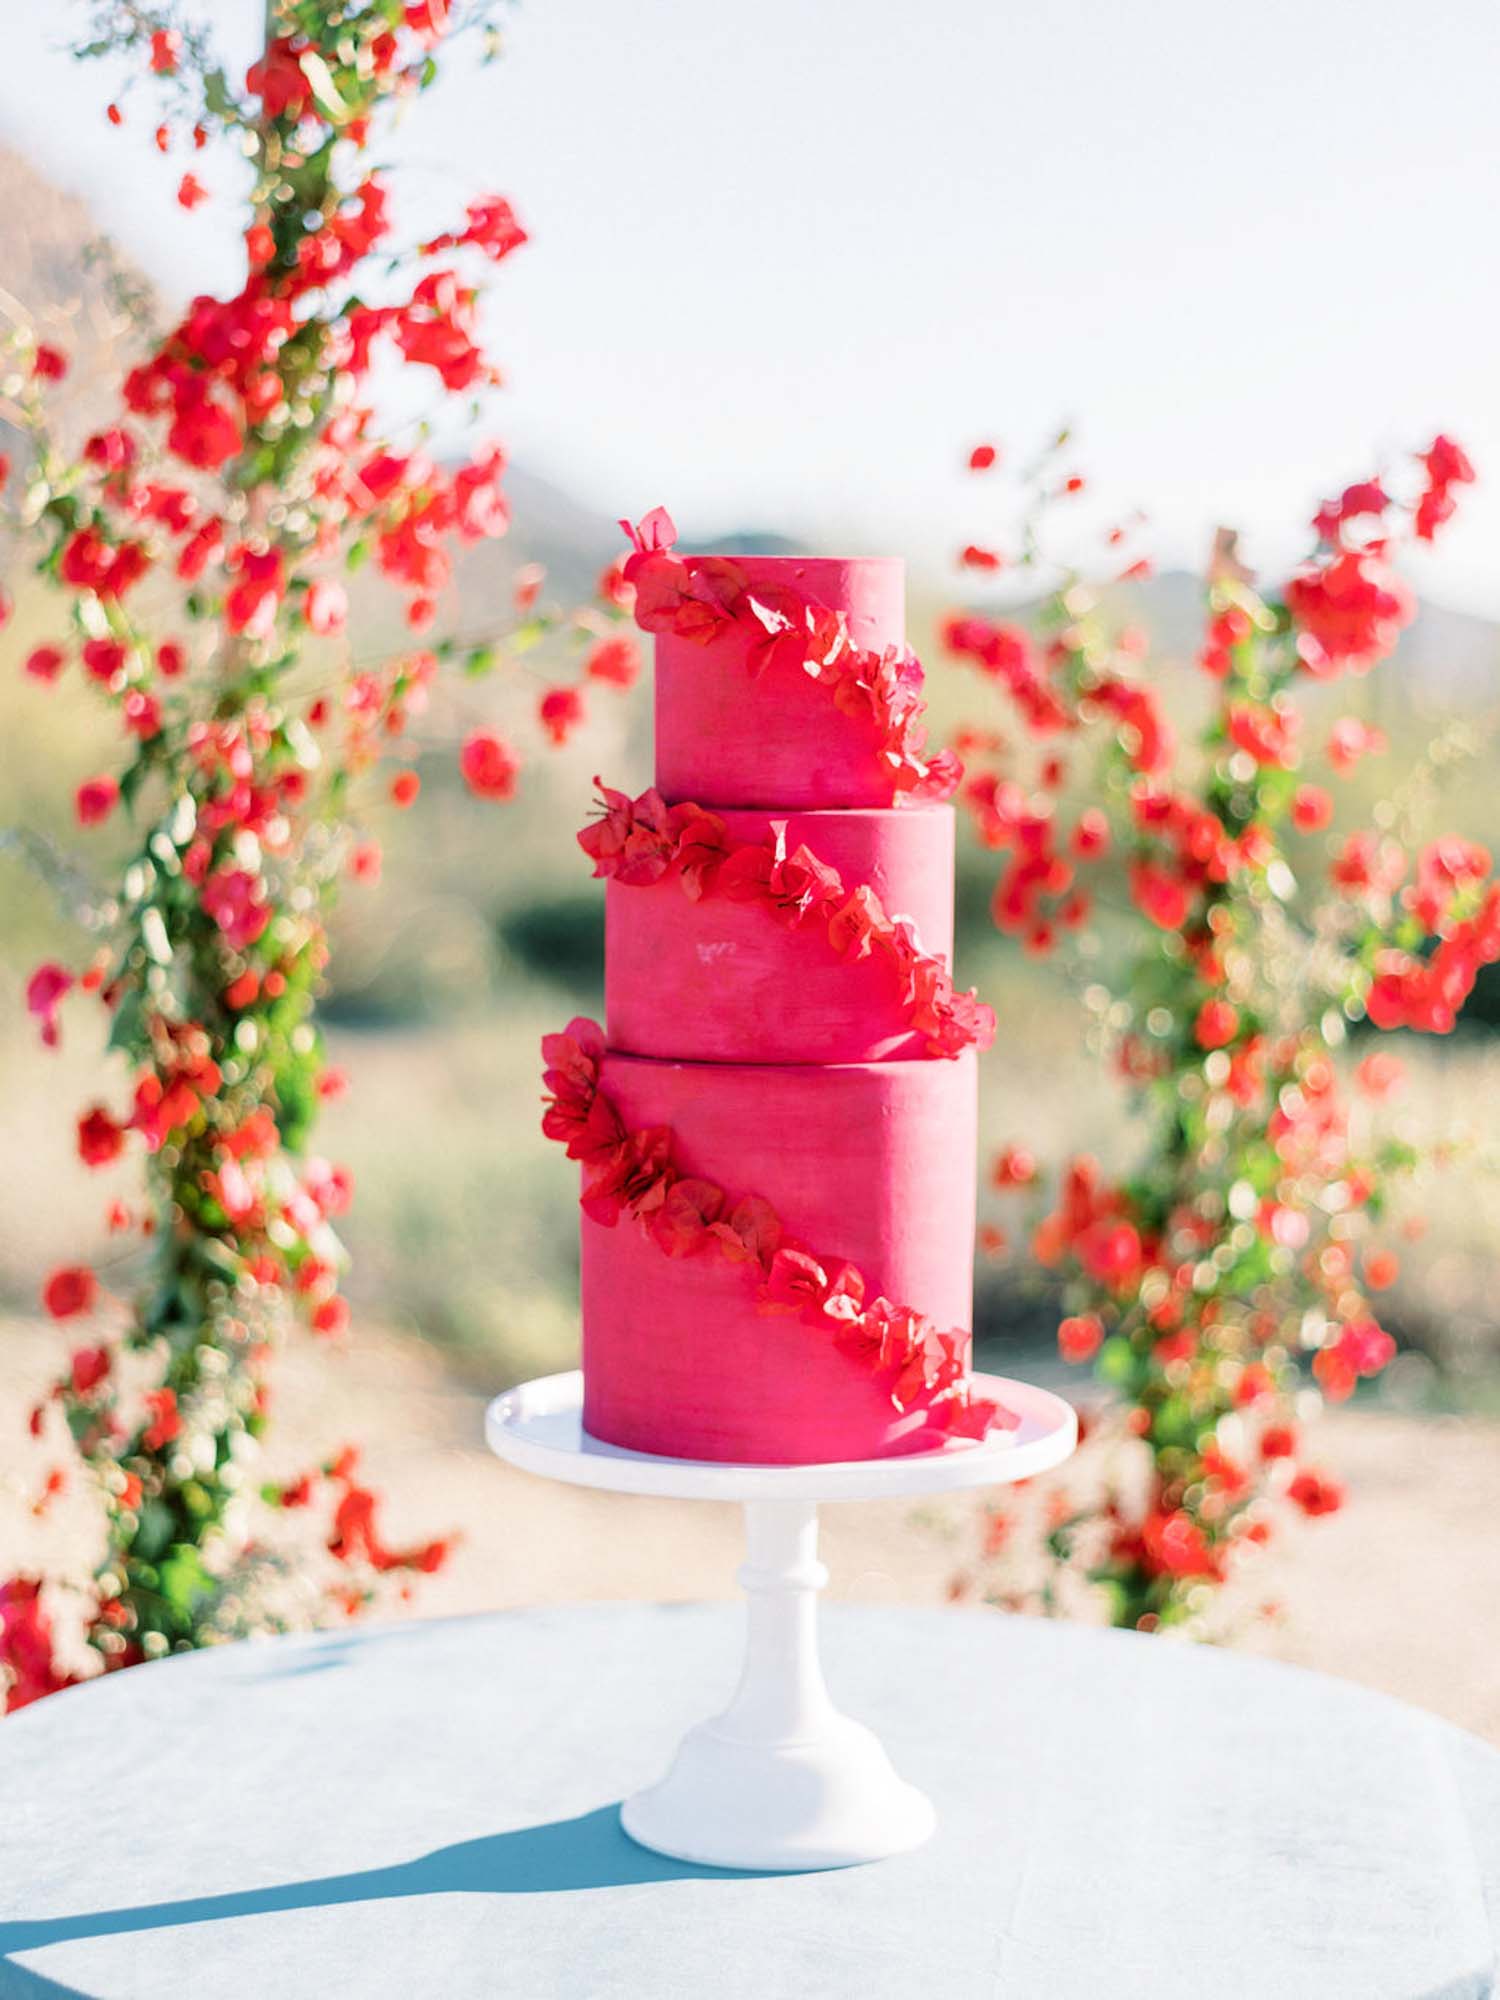 Desert wedding inspiration featuring native Arizona plants and a custom floral suit | Daniel Kim Photography | Featured on Equally Wed, the leading LGBTQ+ wedding magazine